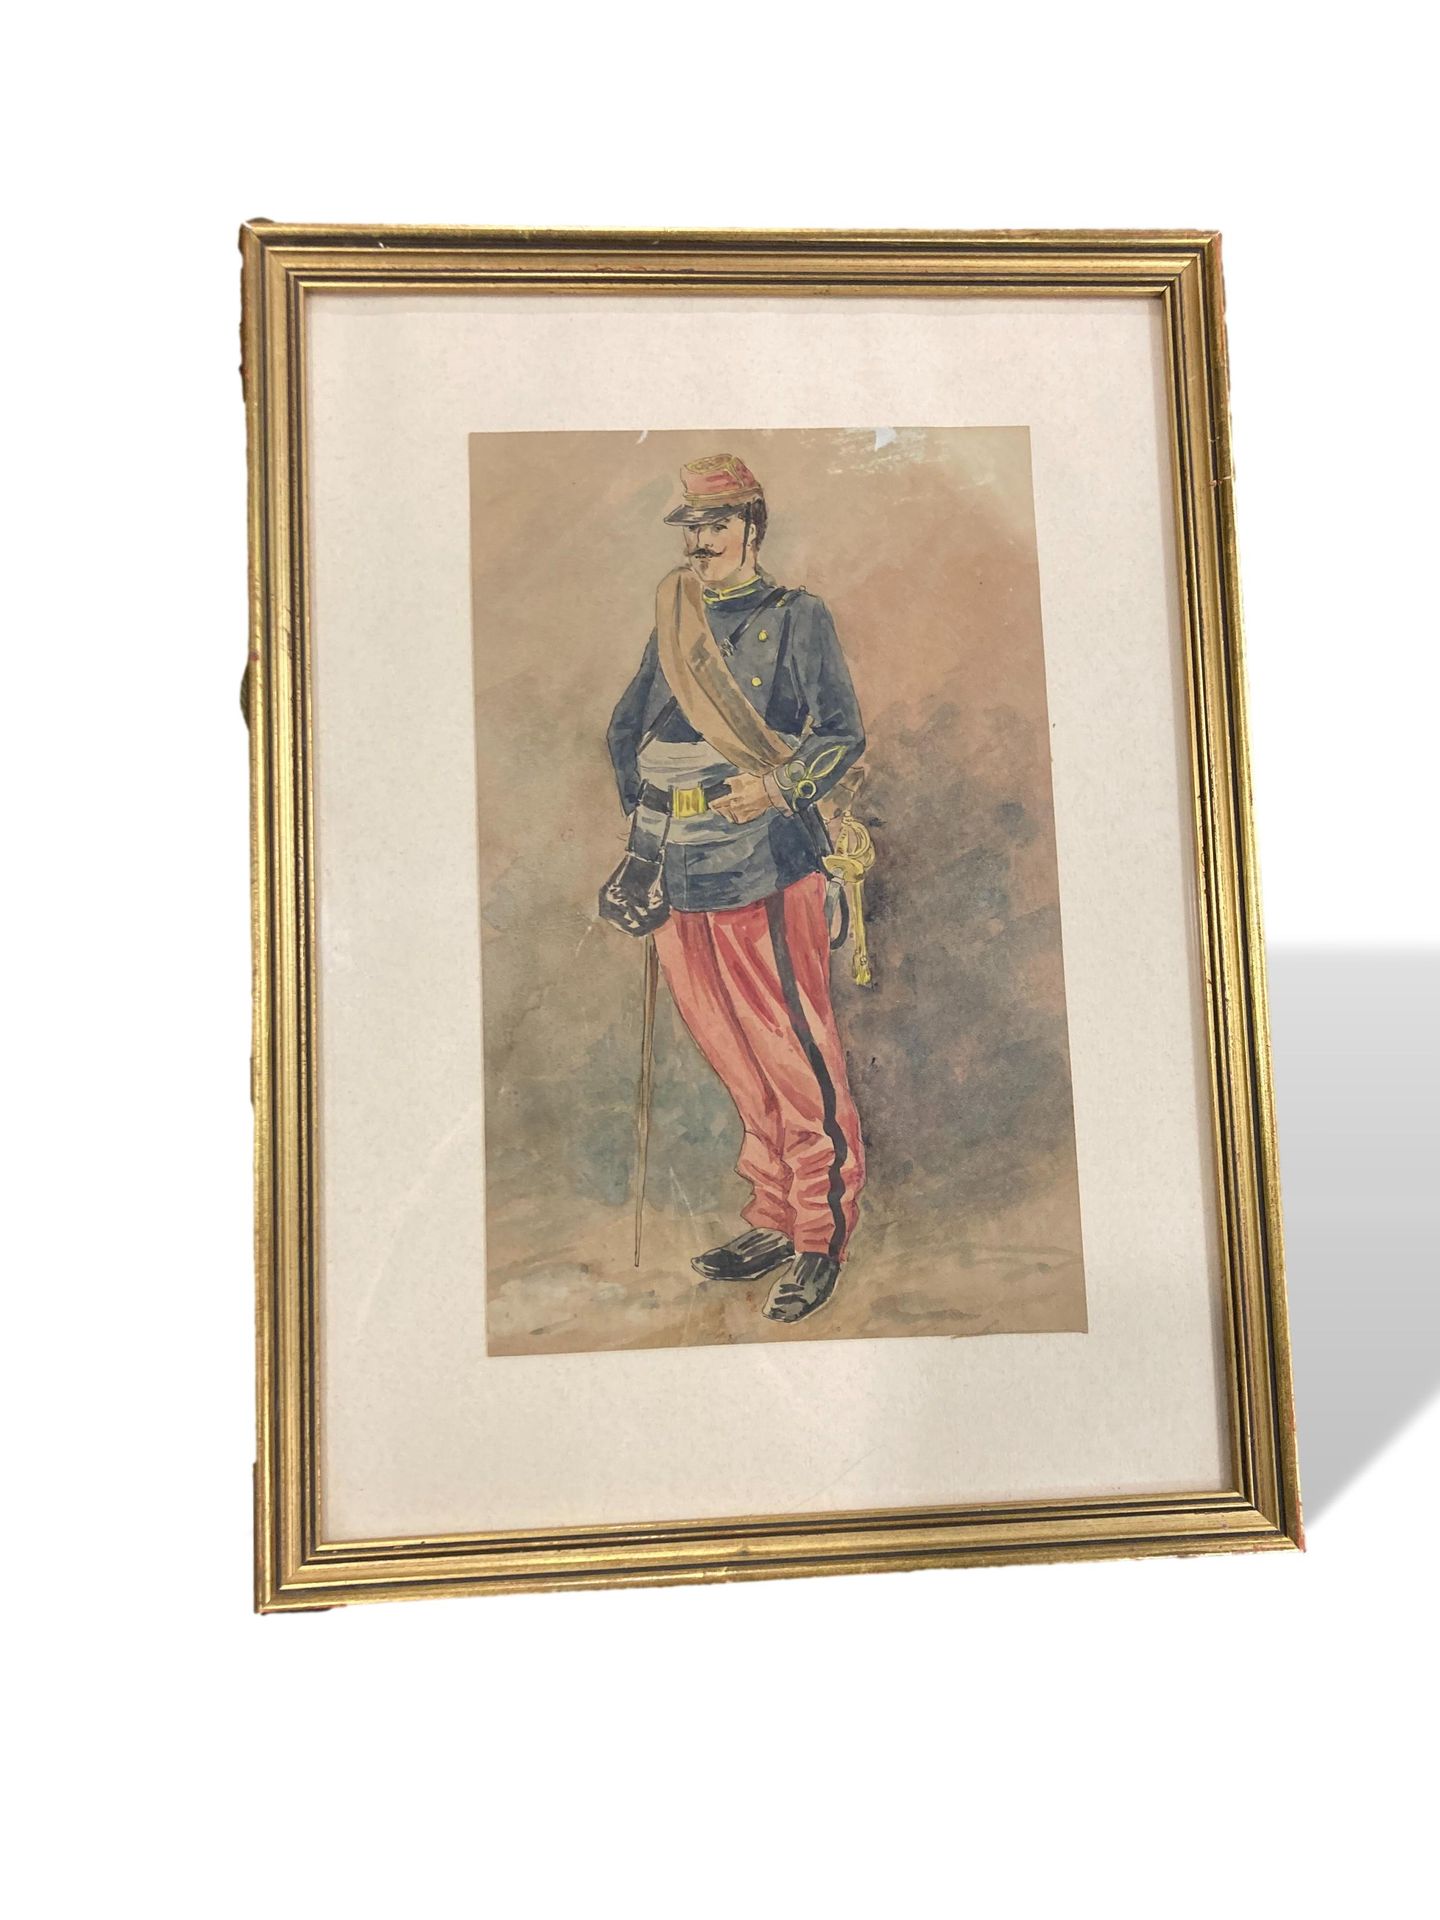 Null French school. 20th century

Soldier and Zouave

Pair of watercolors on pap&hellip;